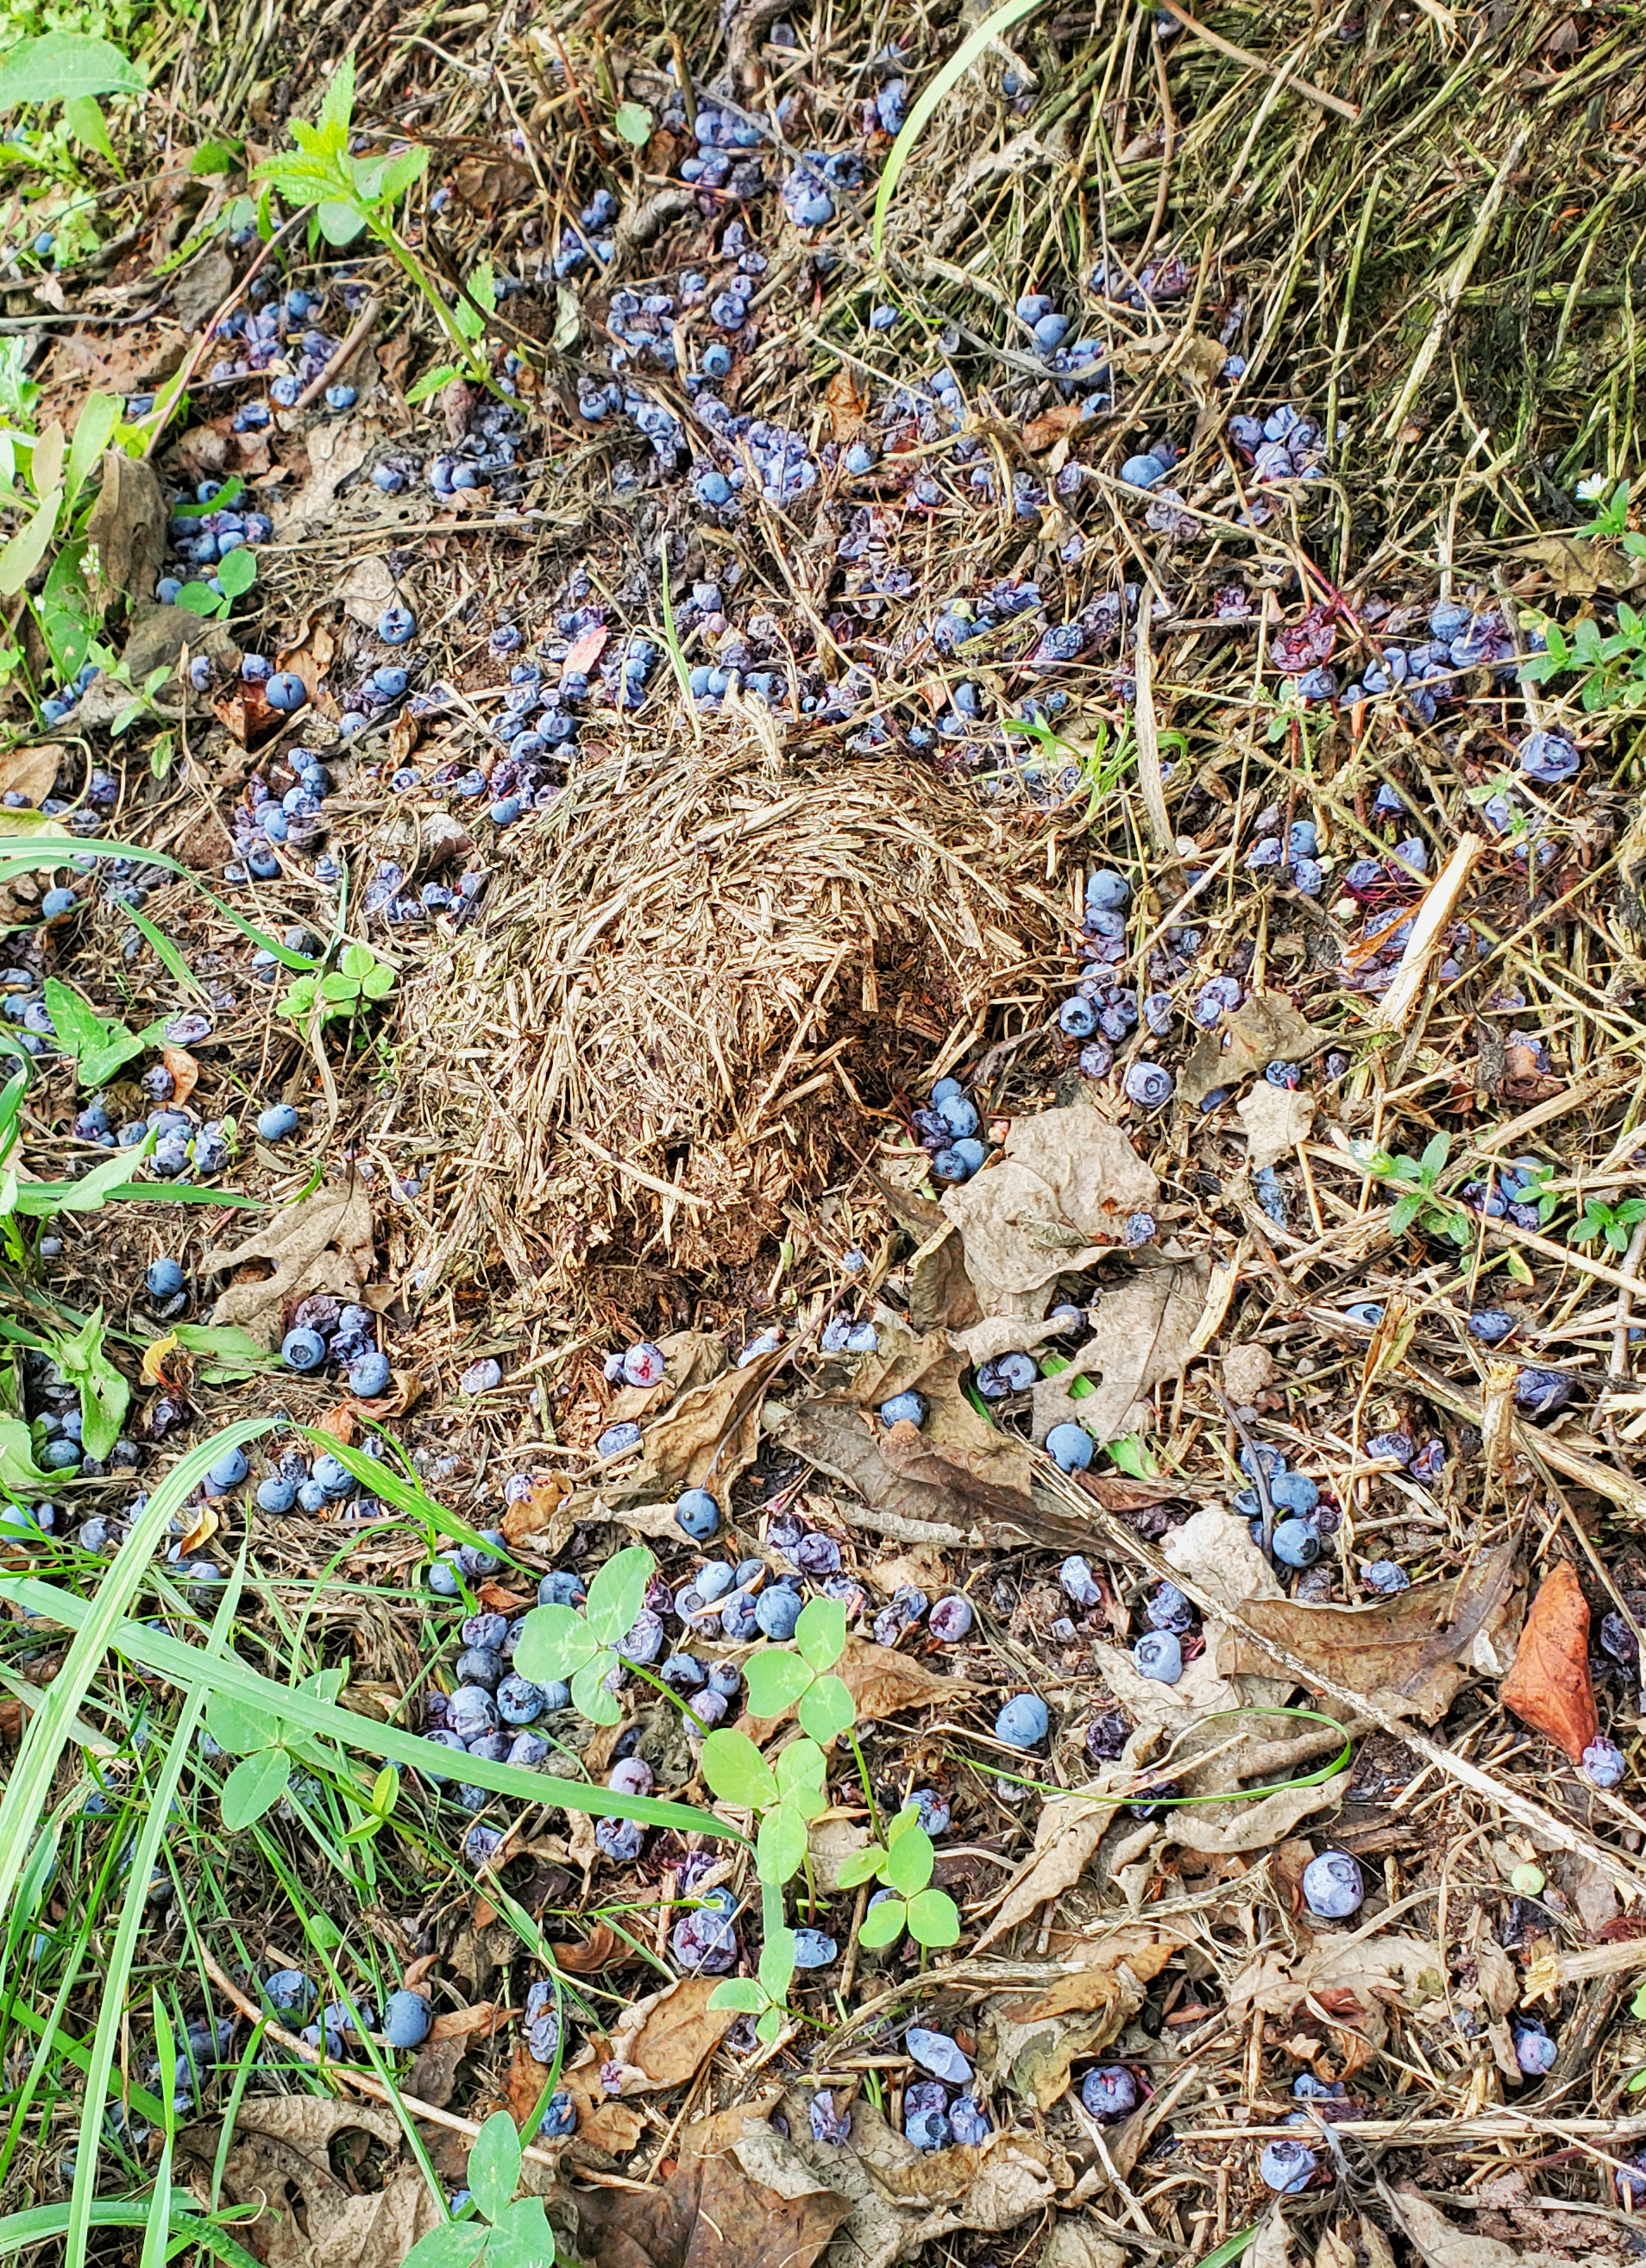 Blueberry on the ground.